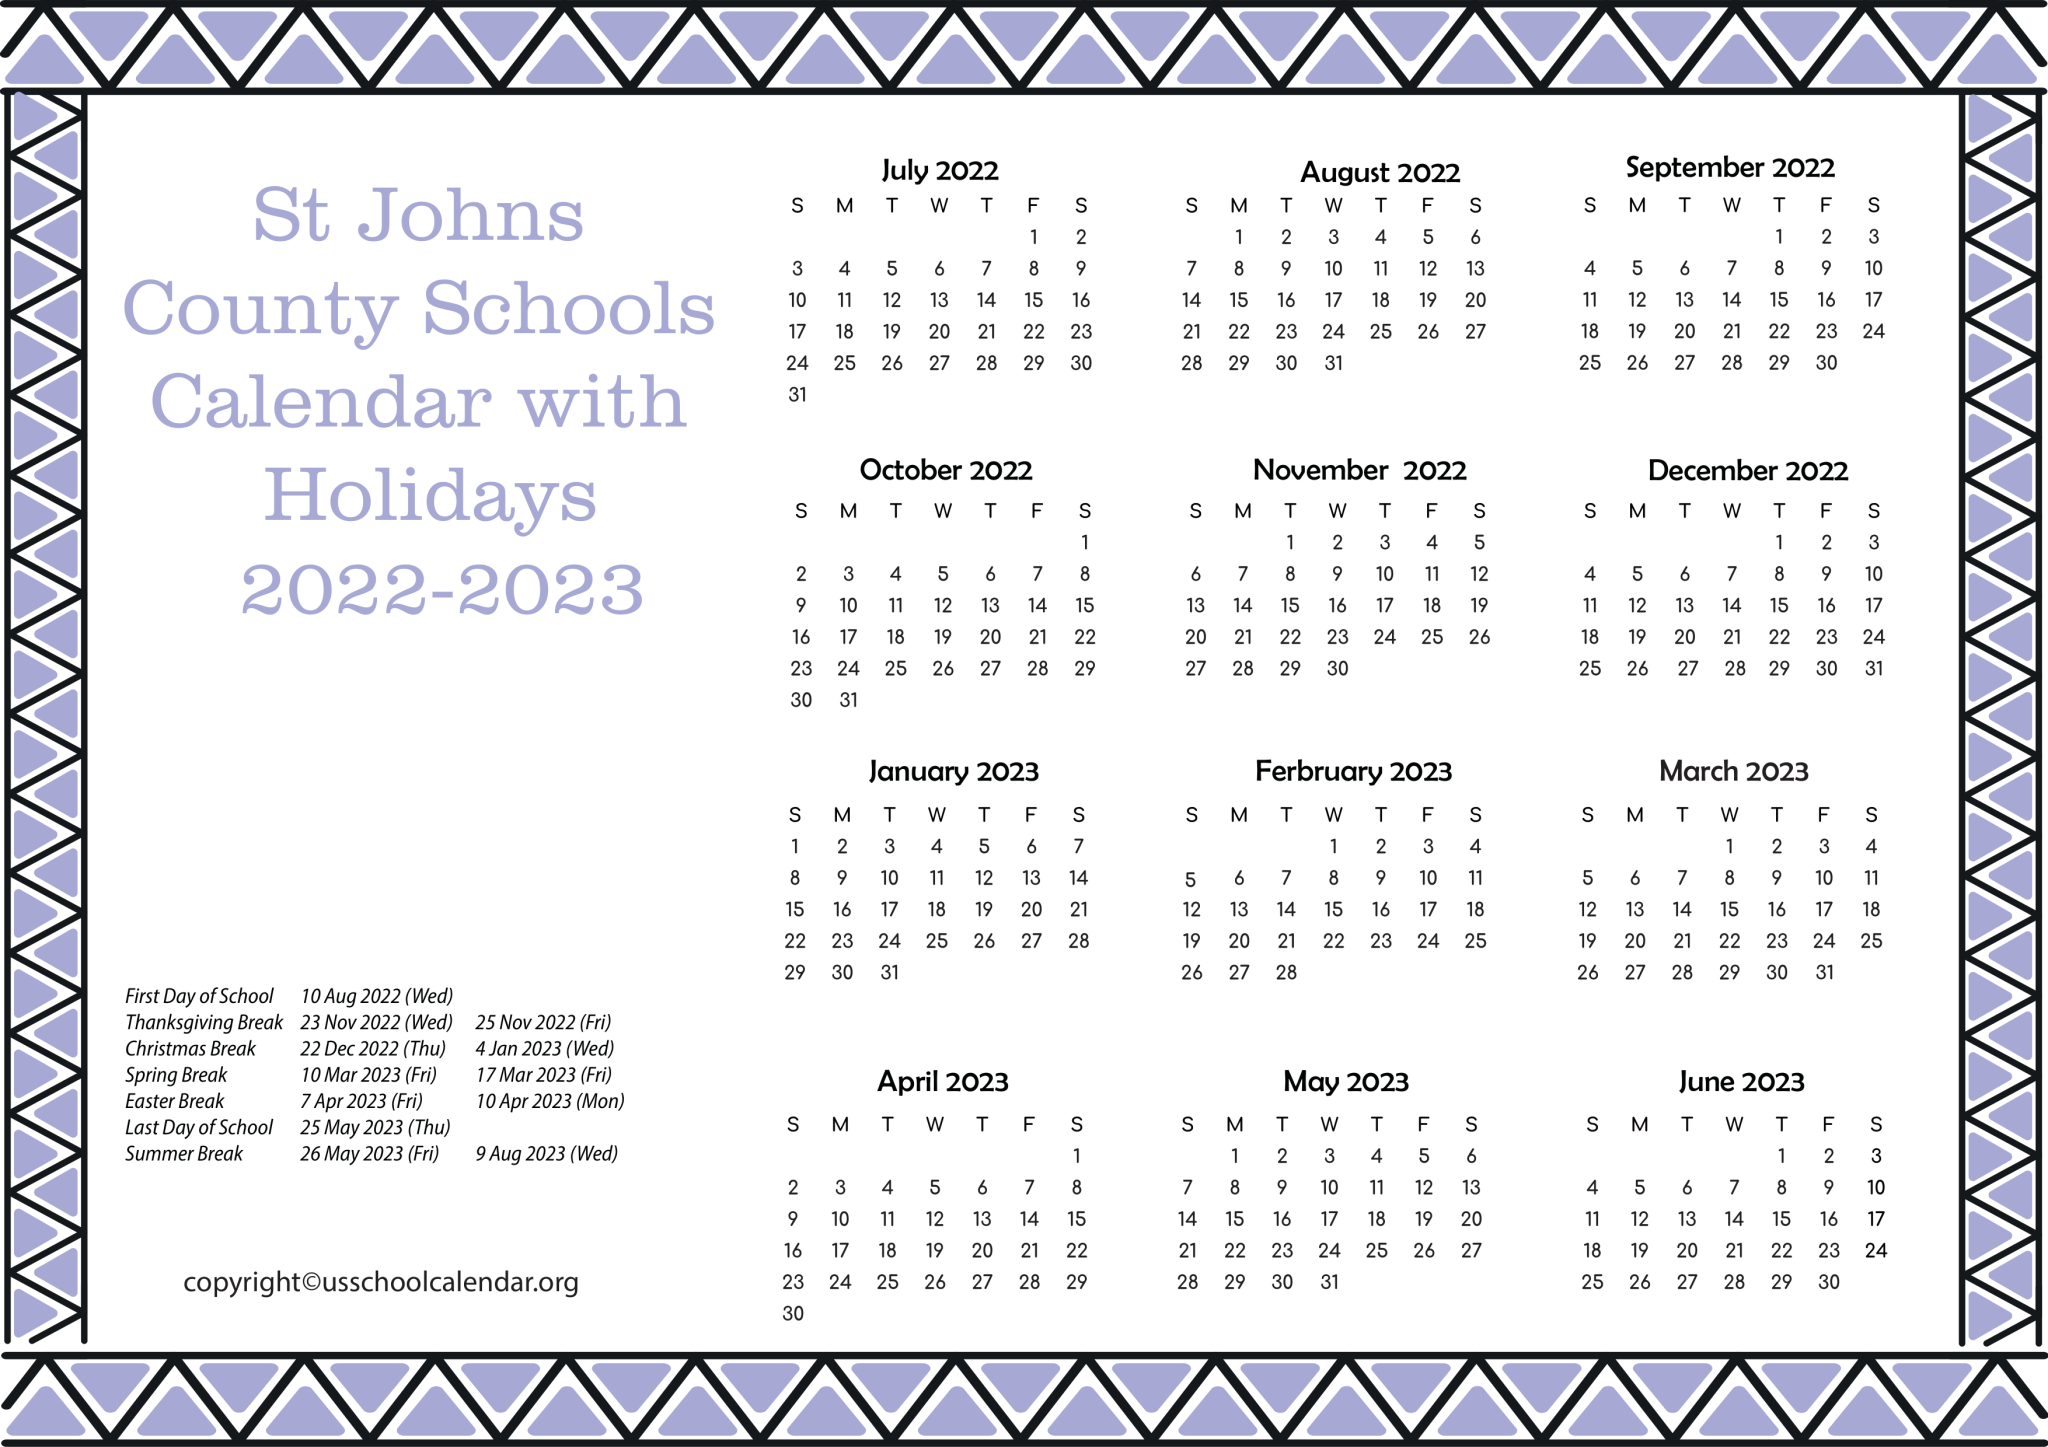 St Johns County Schools Calendar With Holidays 2022 2023